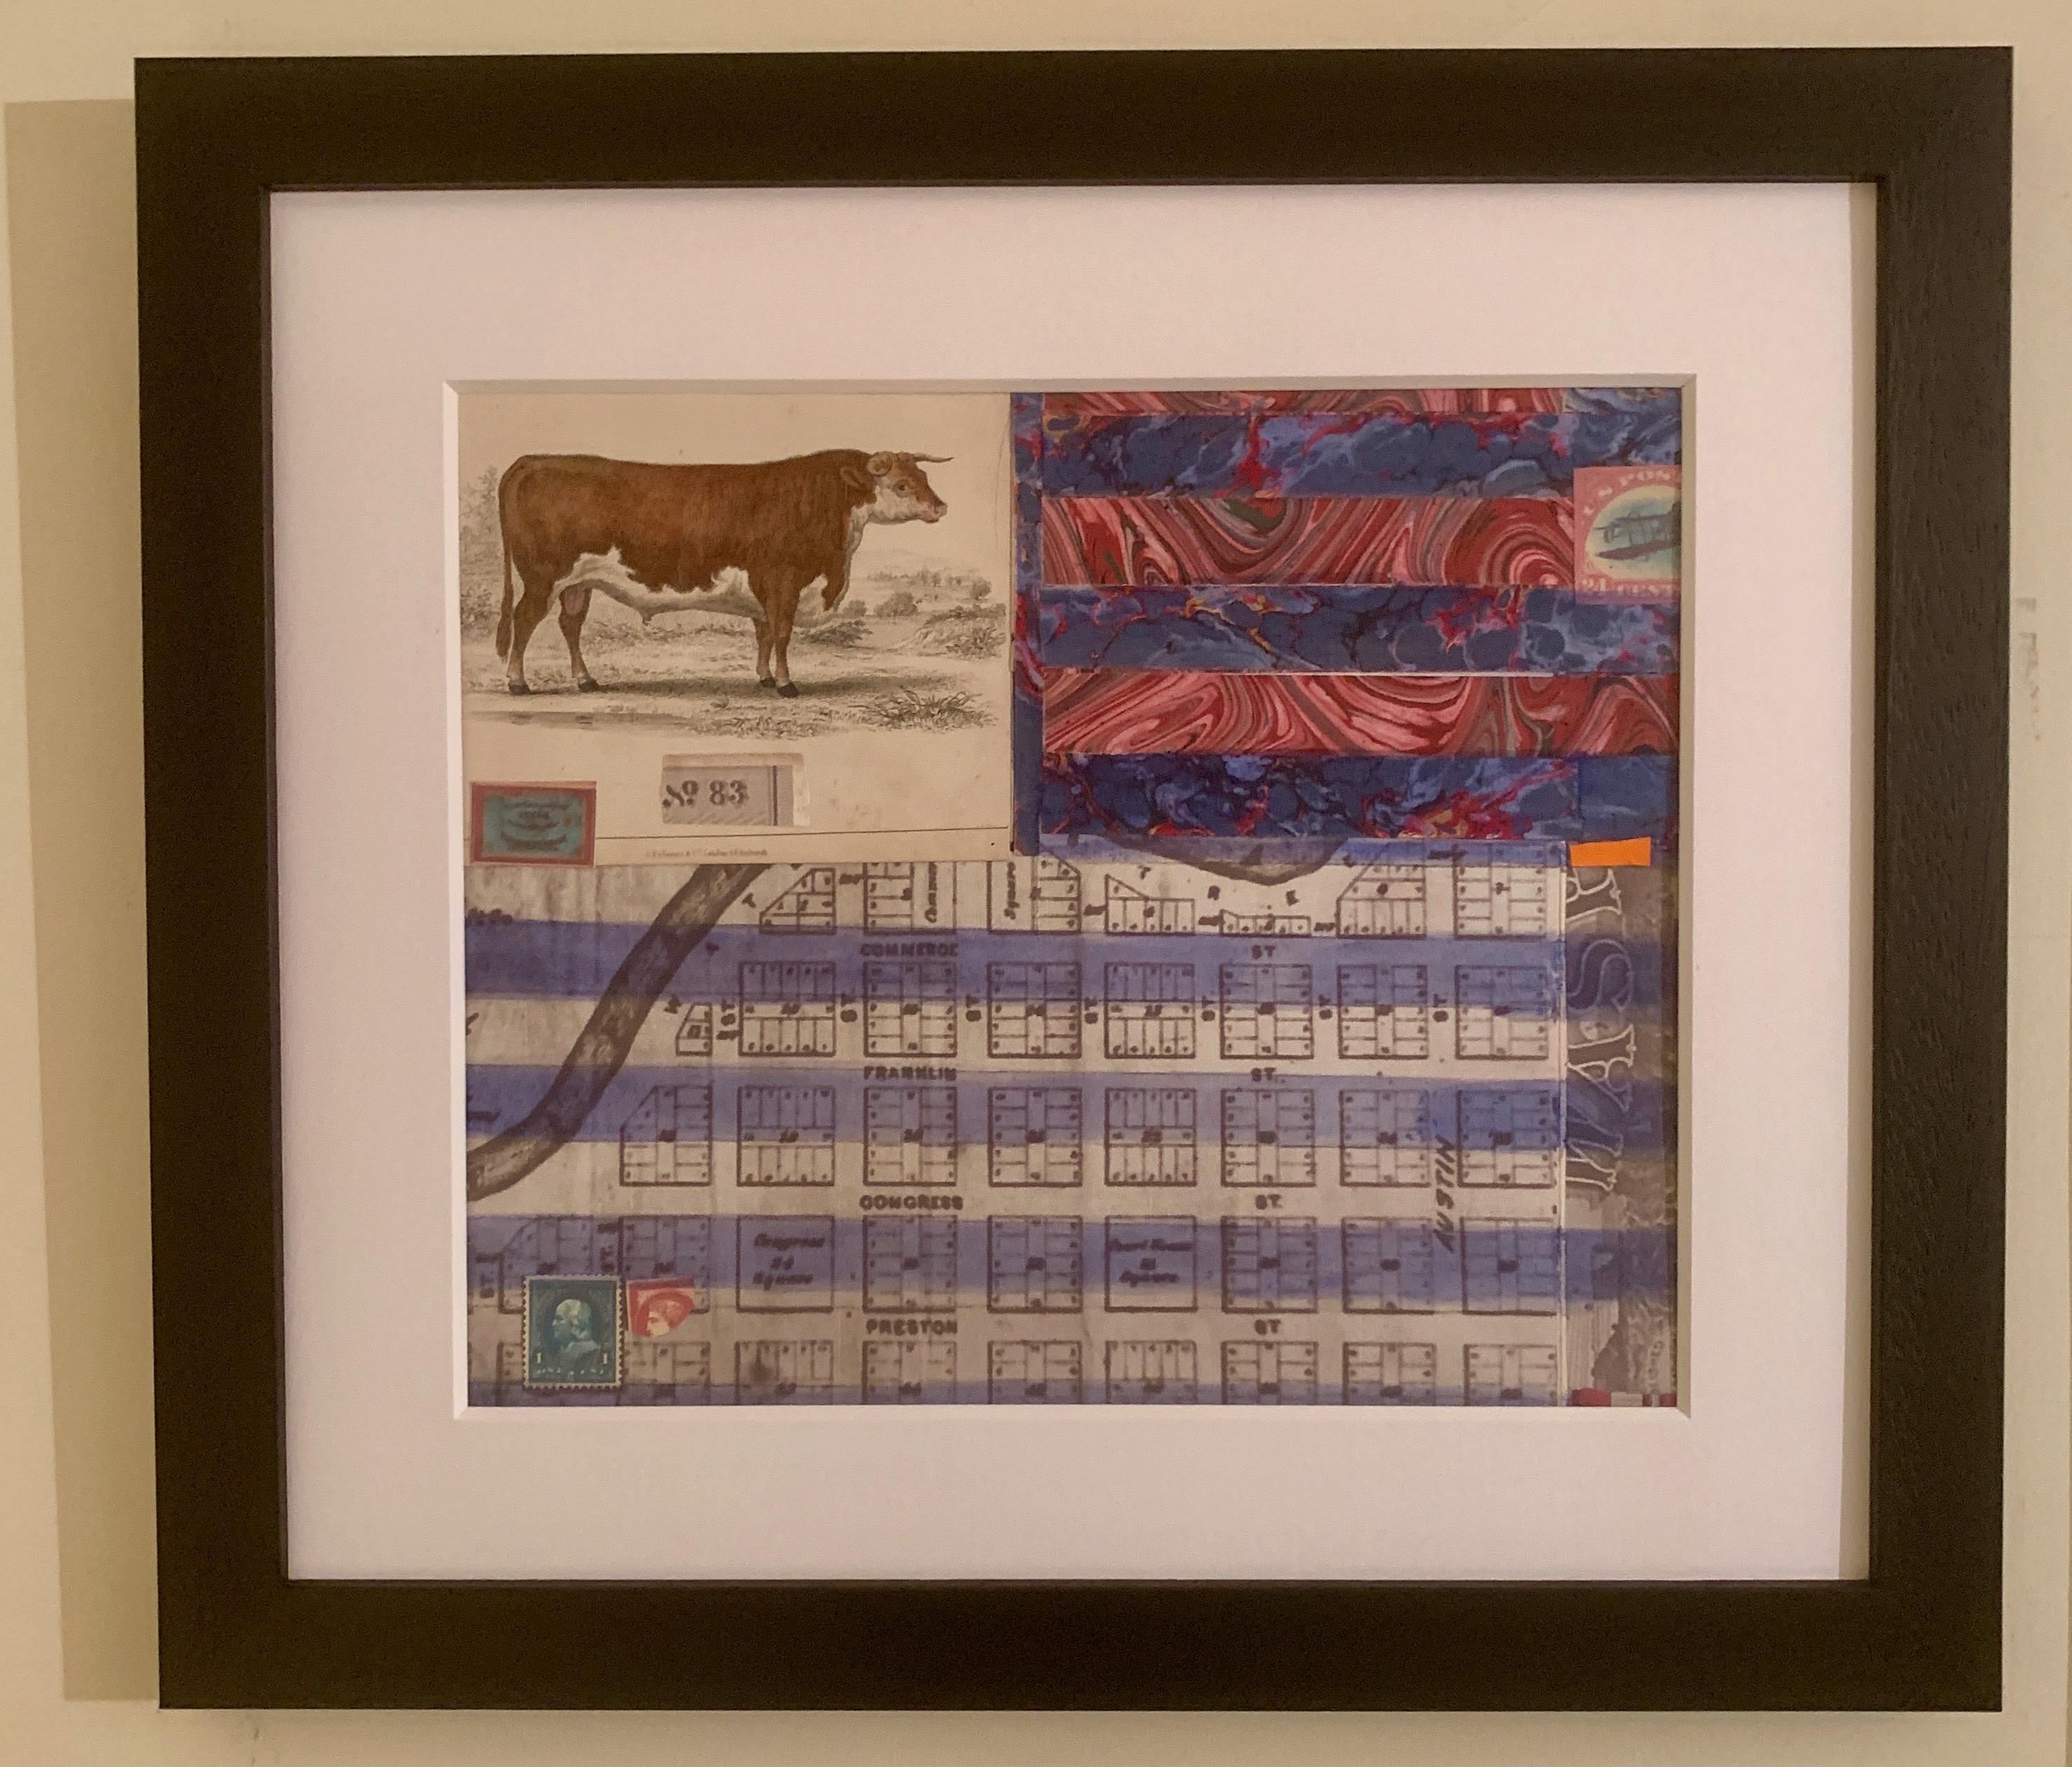 American flag collage with a 19th C hand colored engraving of a cow